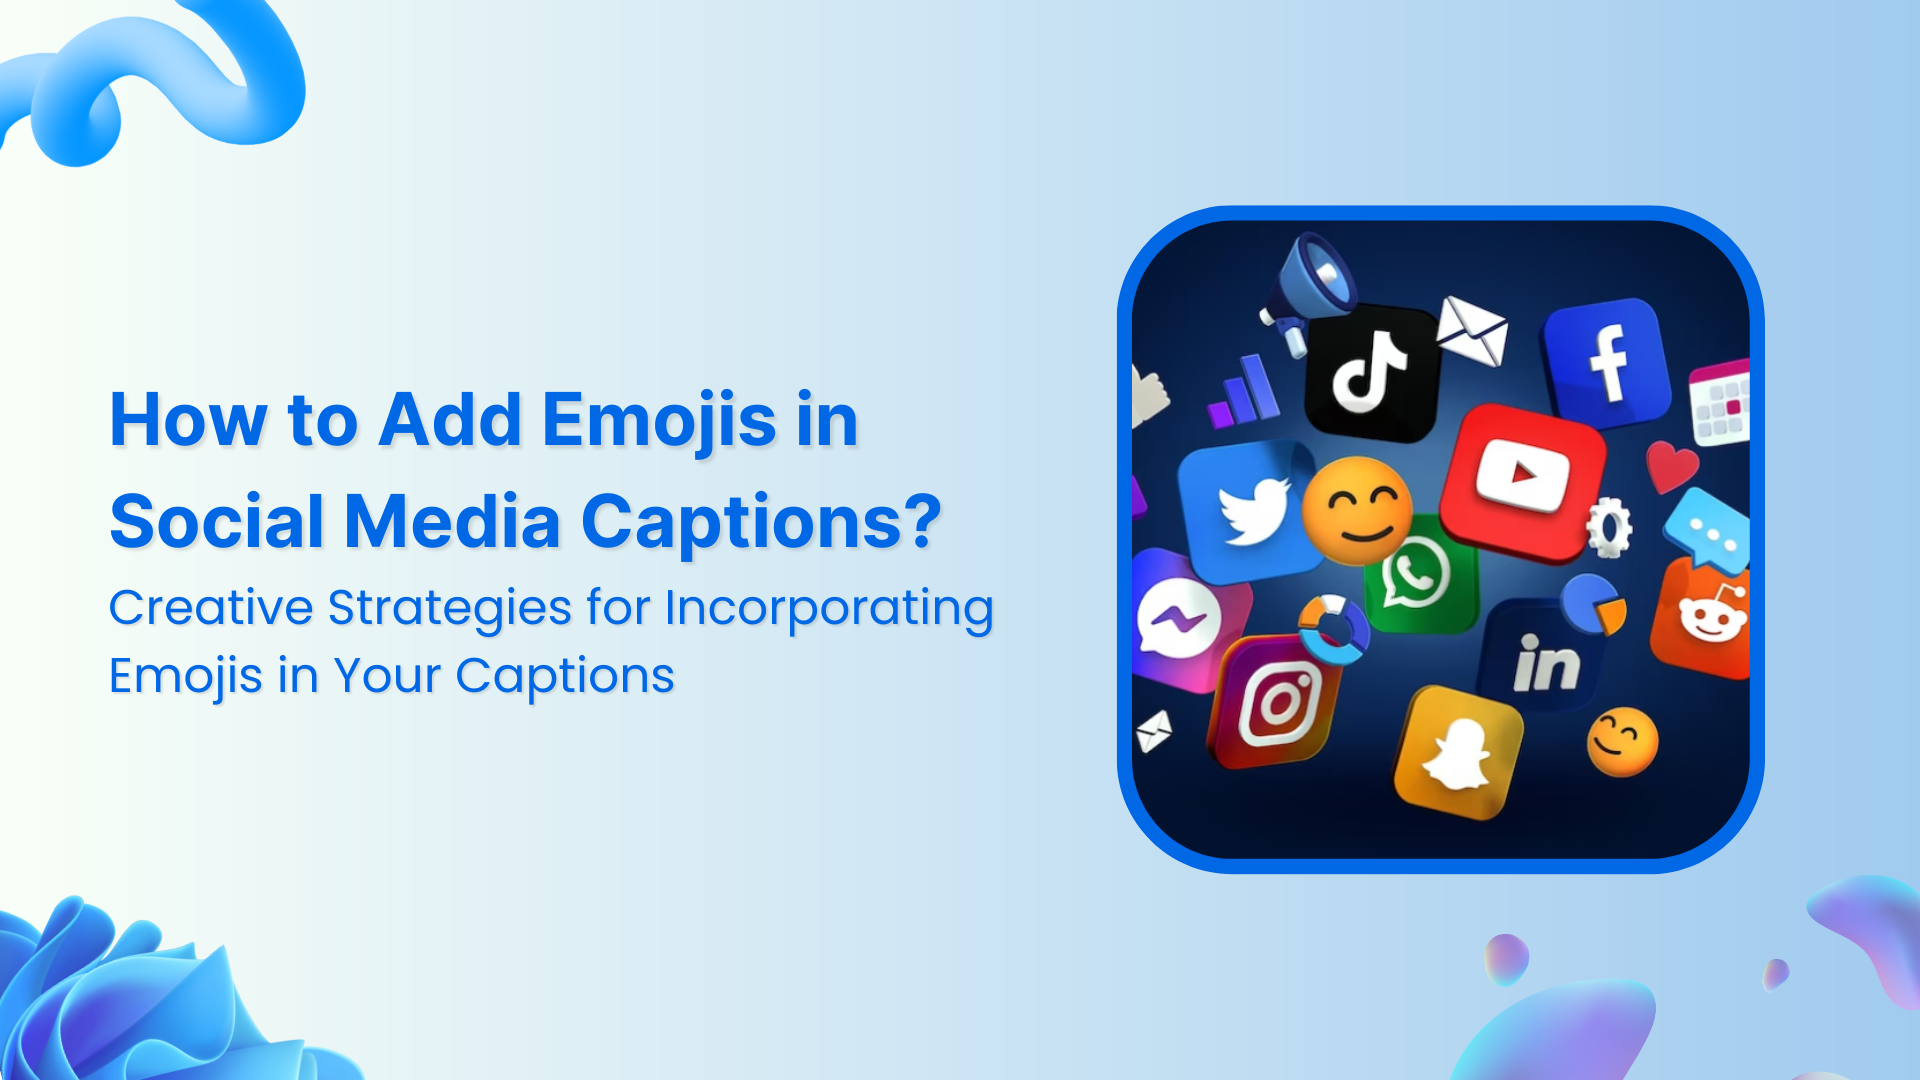 How to Add Emojis in Social Media Captions?